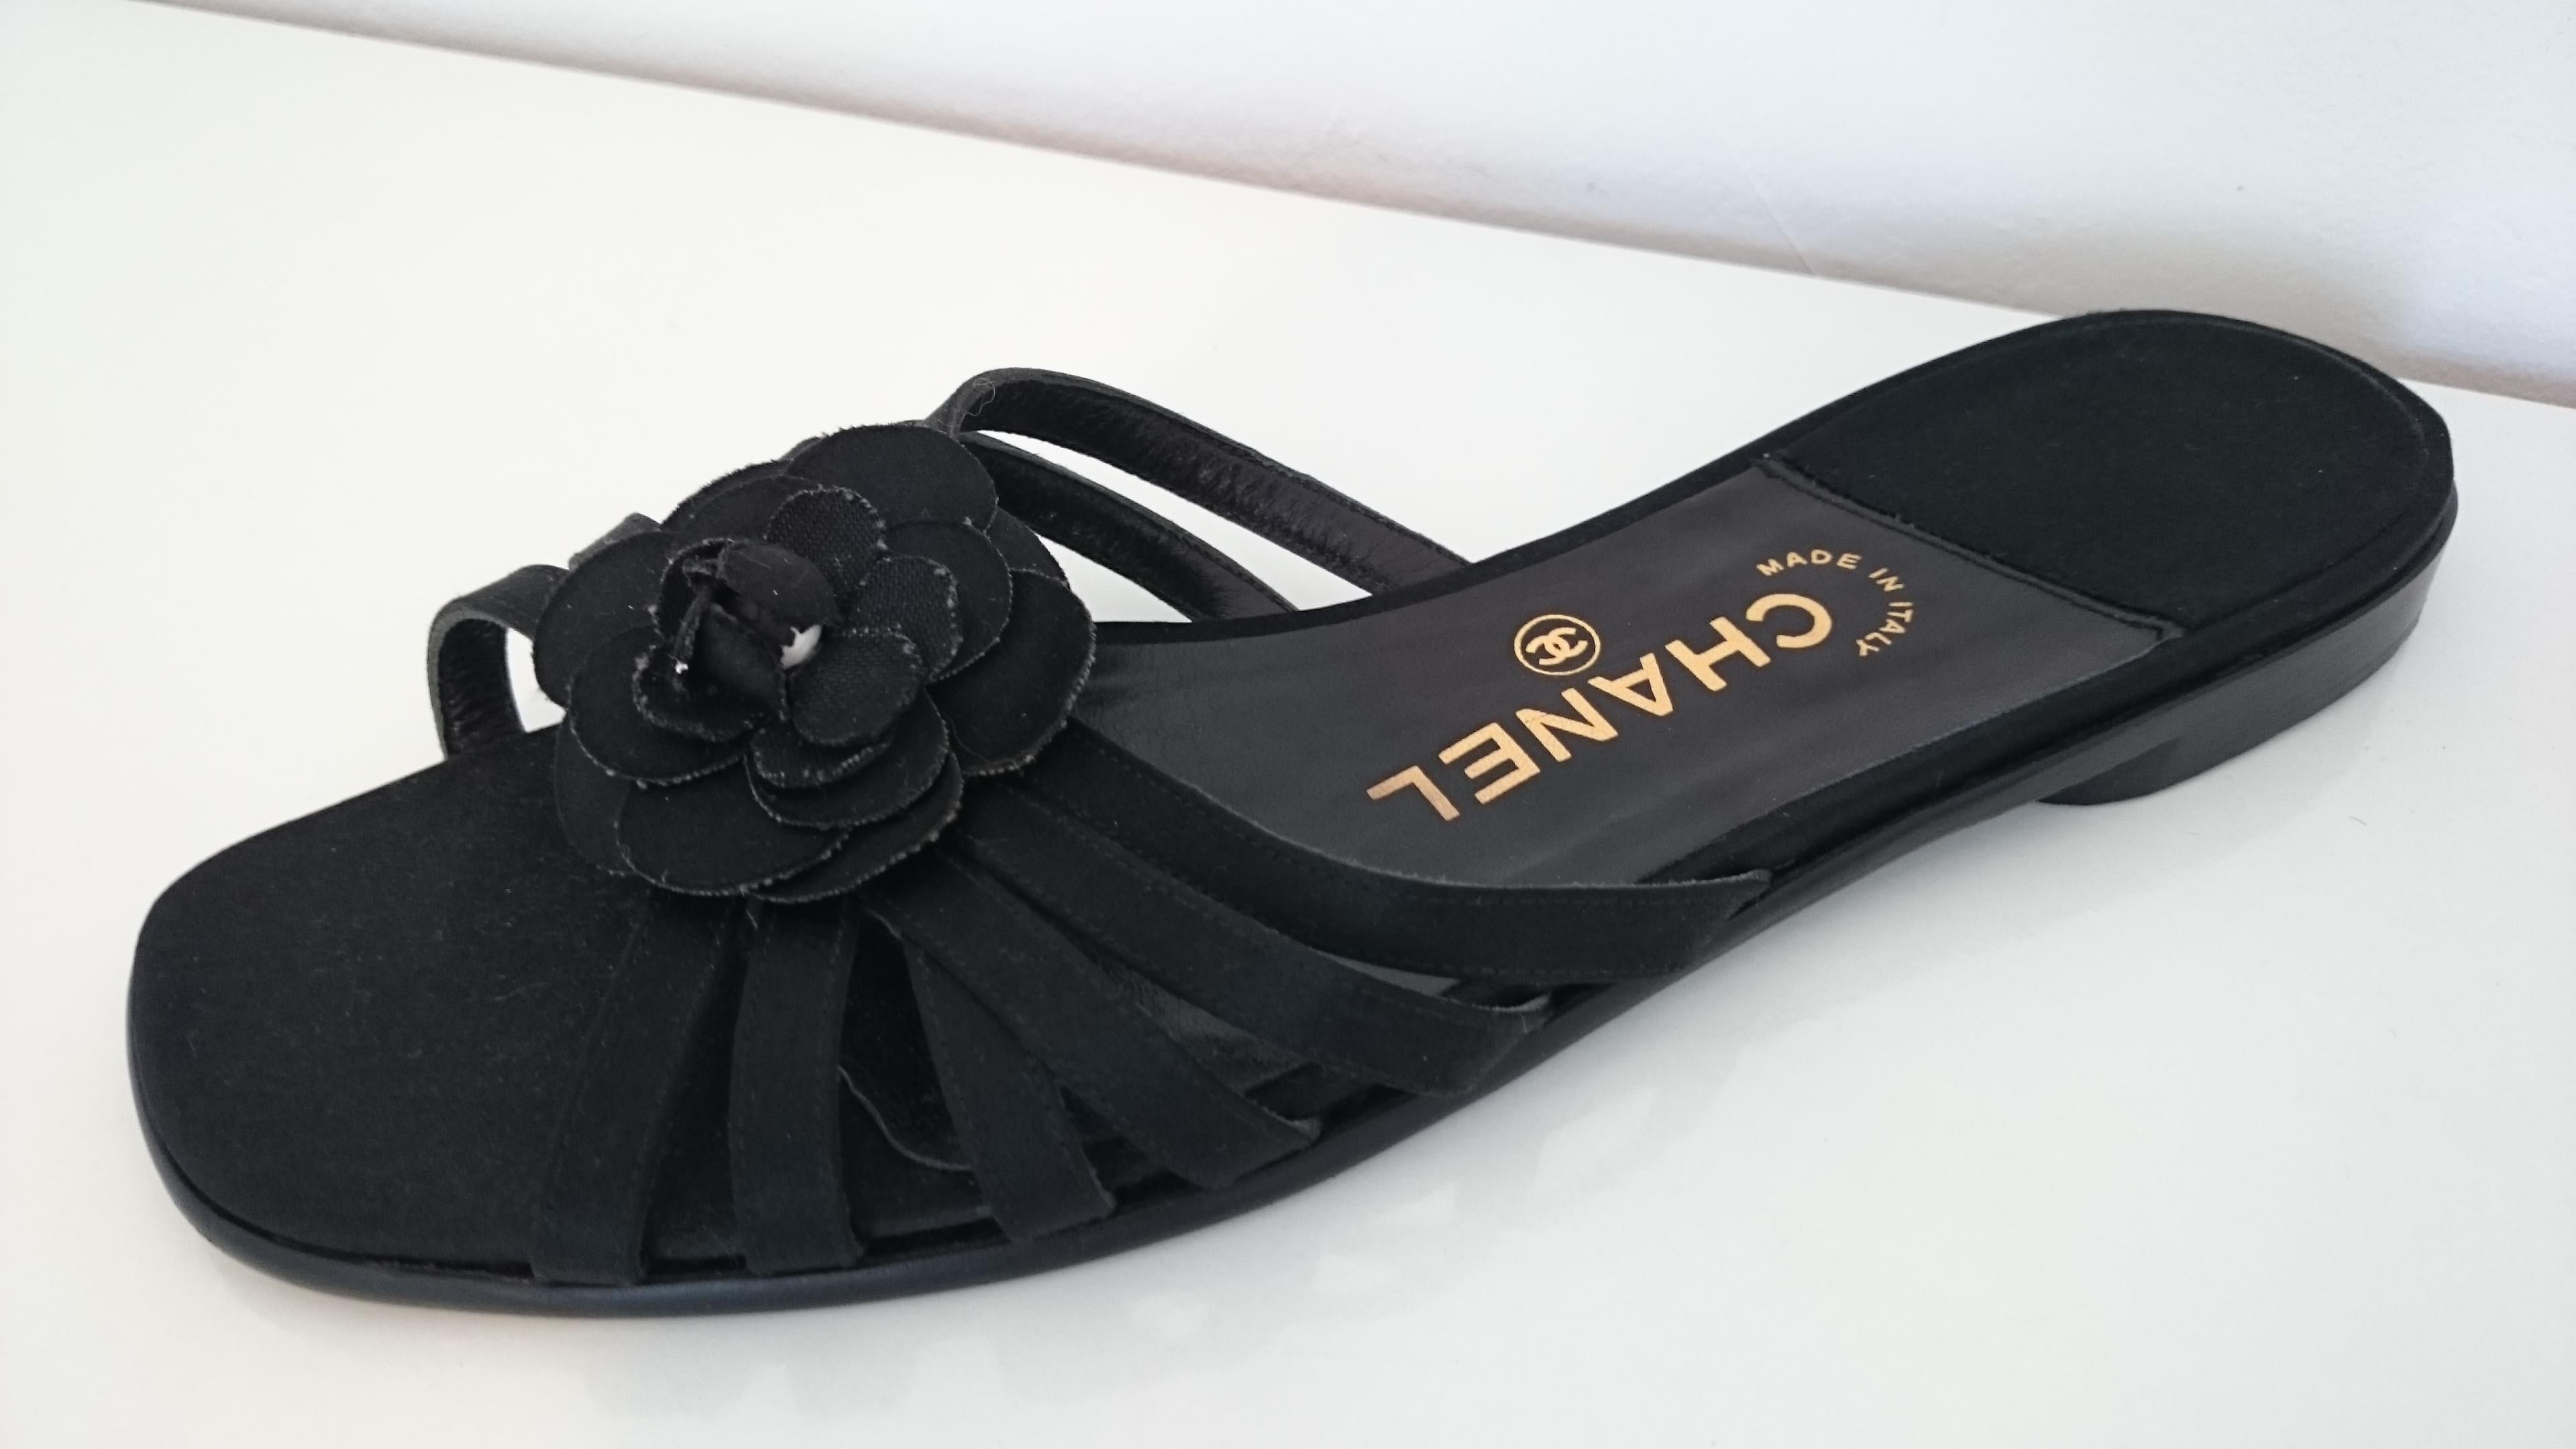 Chanel Open-Stripes Sandals with Flowers on top.
Color: Black
Silk and Leather
Excellent conditions, only used for few hours.
Original Chanel dust-bag not included.
Size 41 (EU)
Made in Italy